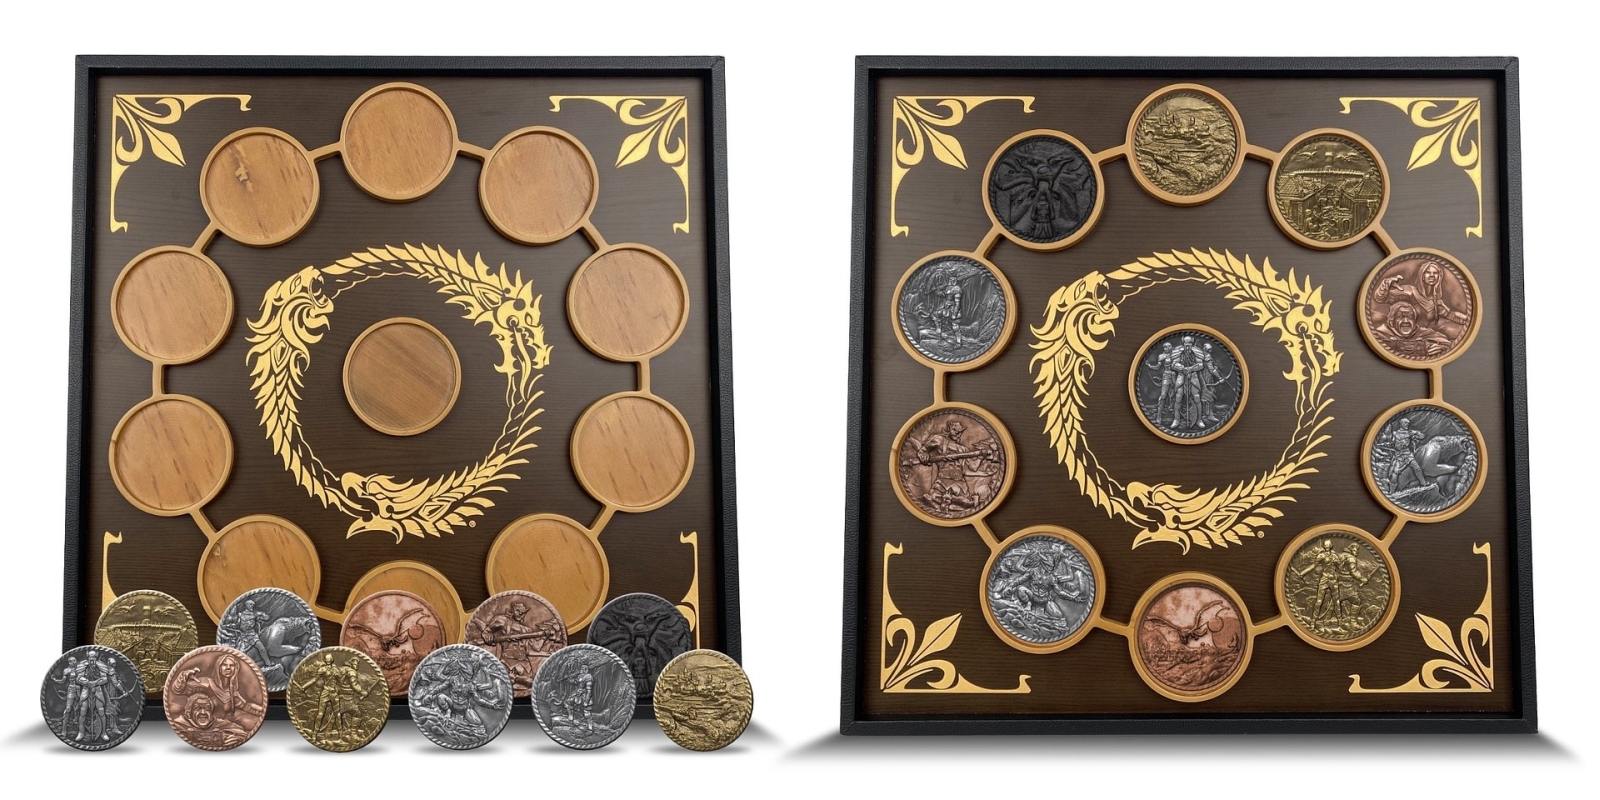 ESO 10th Anniversary: Commemorative Coin Set Now Available